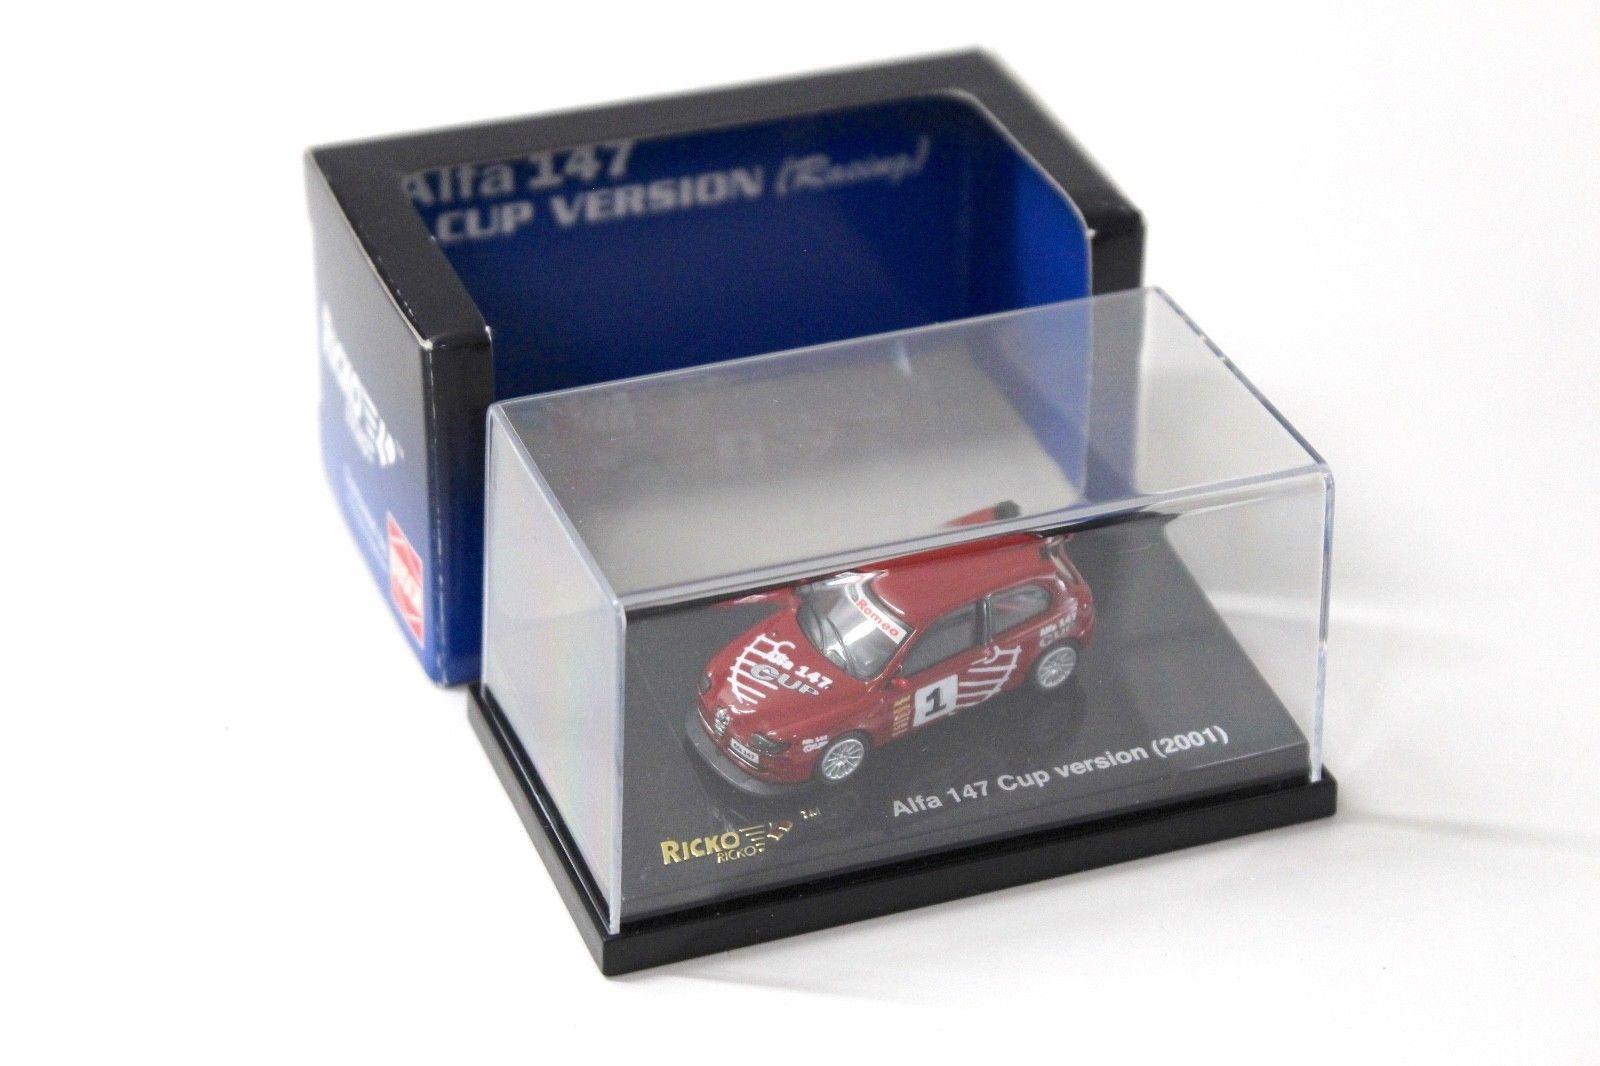 1:87 Ricko Alfa 147 CUP Version 2001 red #1